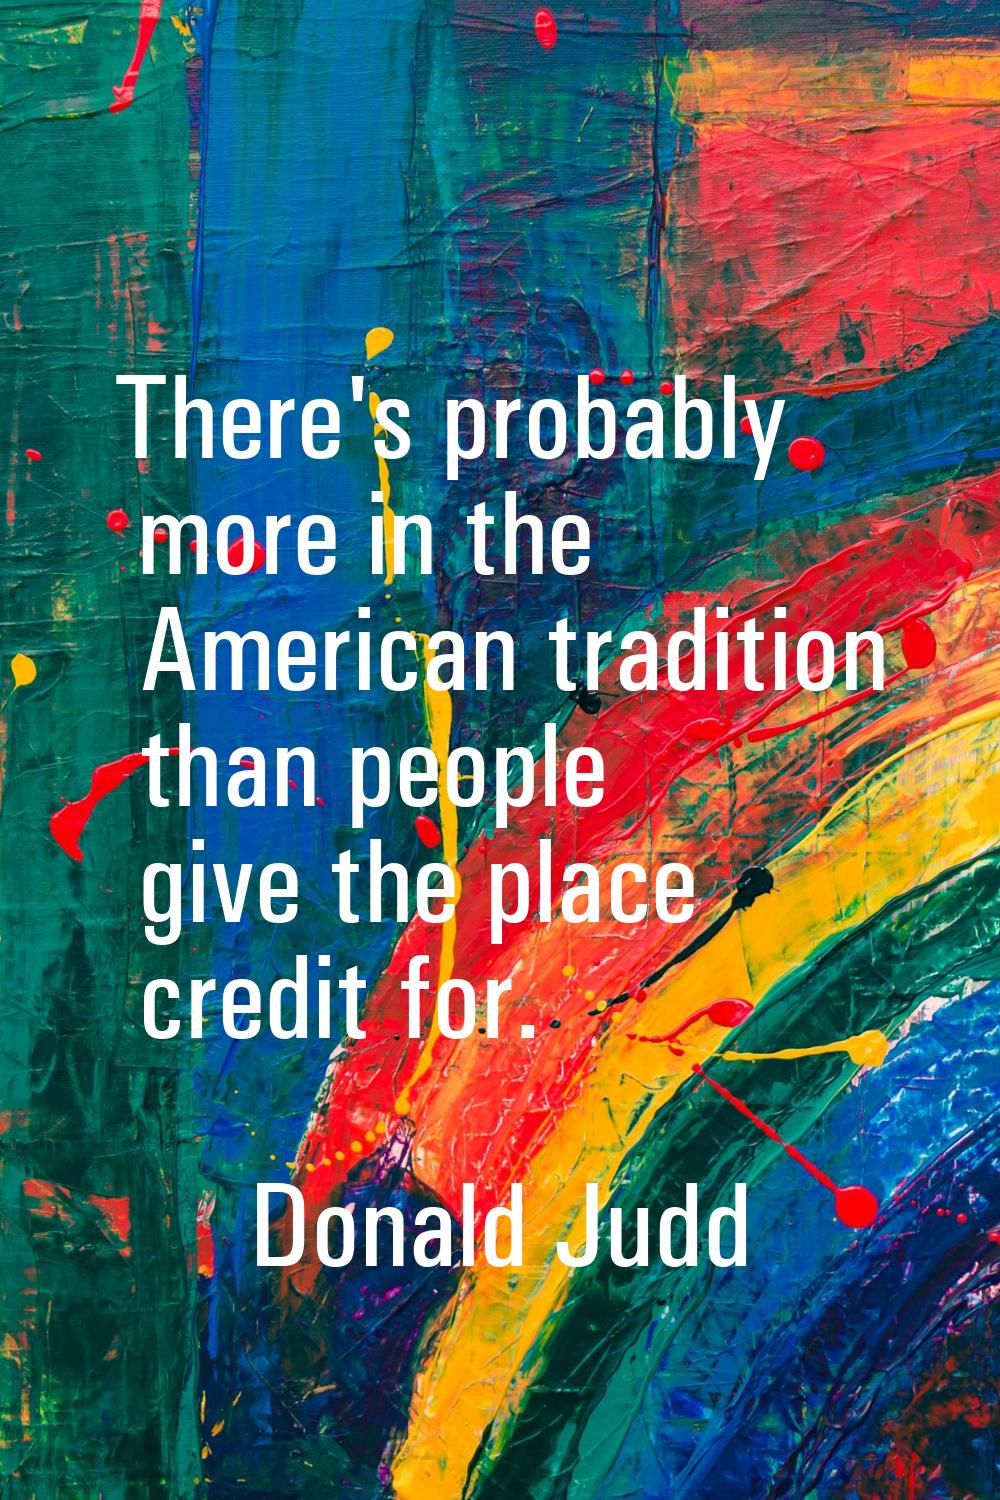 There's probably more in the American tradition than people give the place credit for.